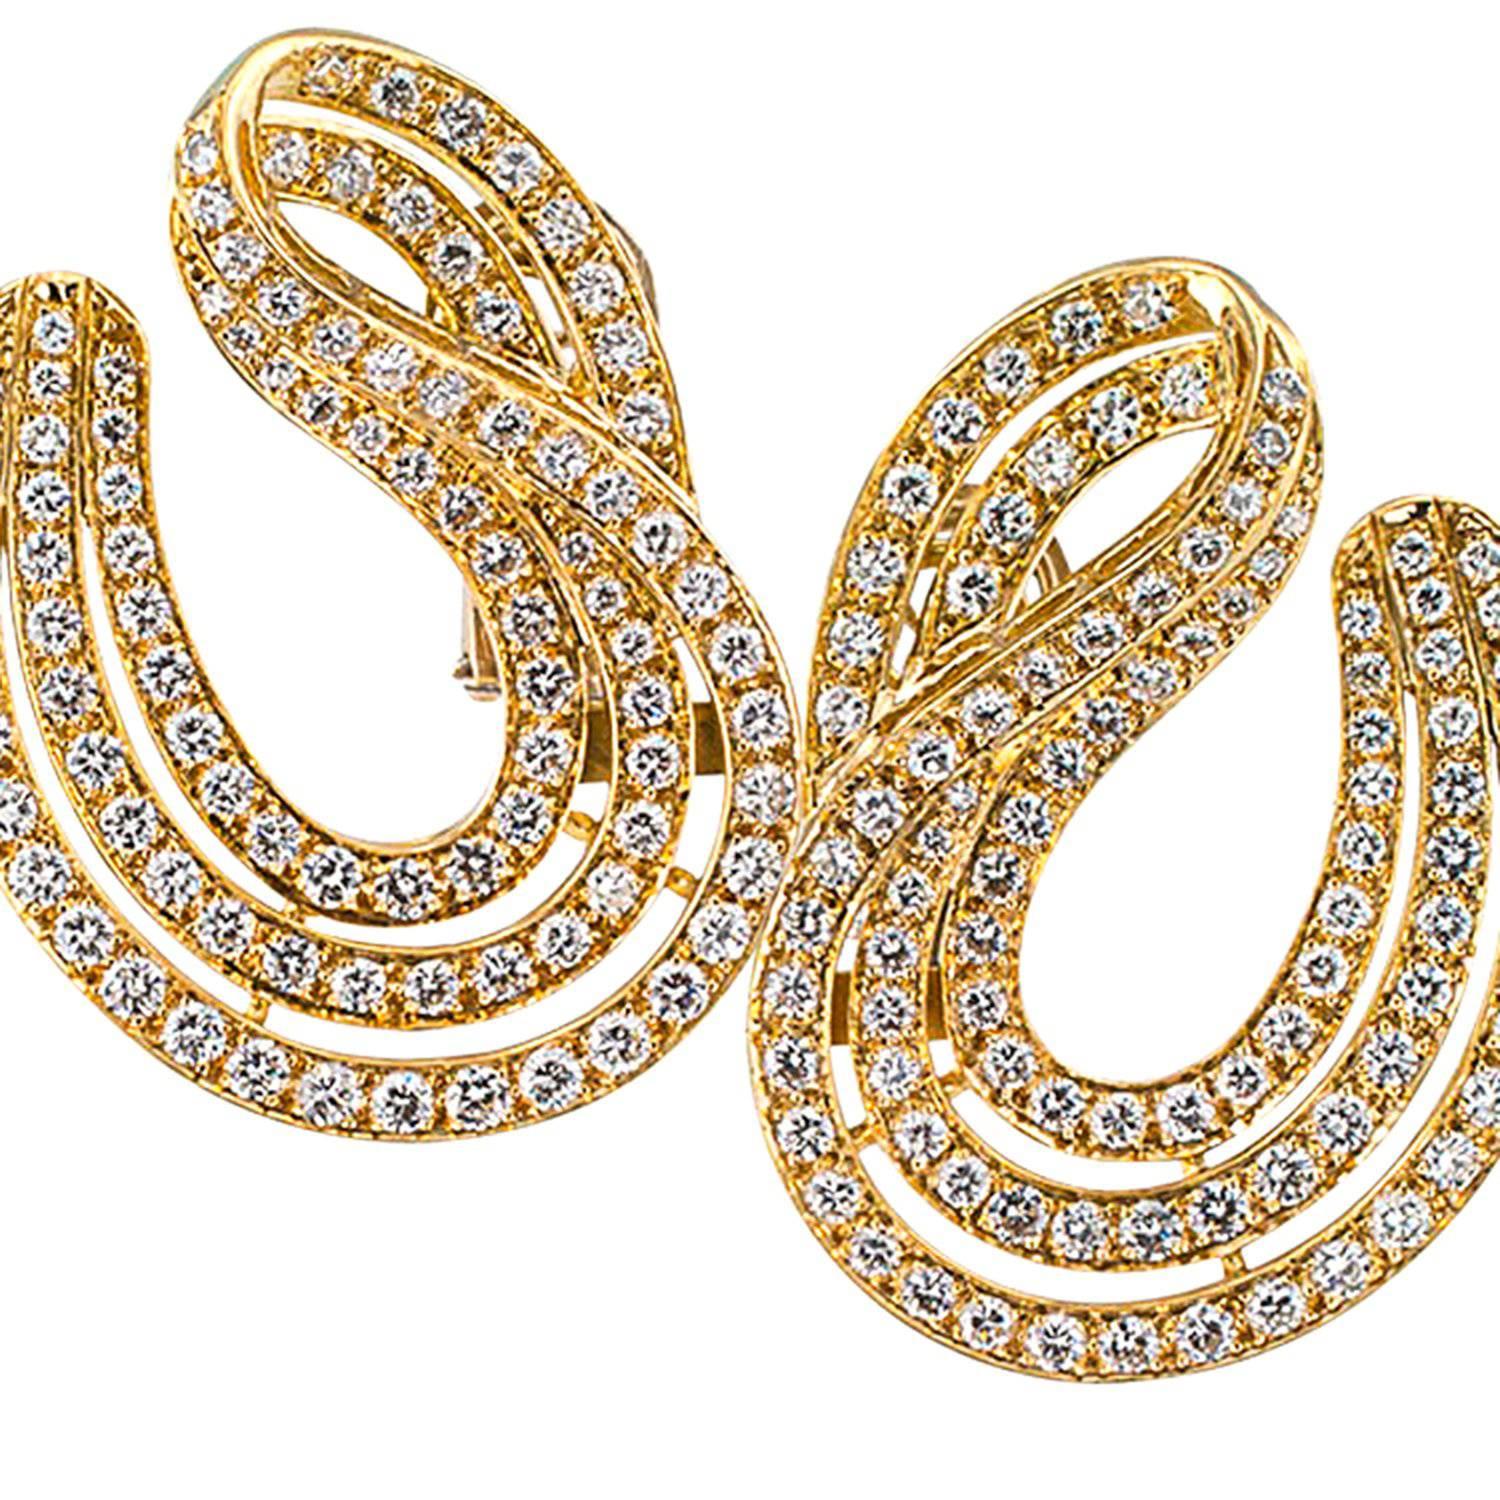 6.50 Carats Diamond and 18 Karat Yellow Gold Earrings

No question about it, these are good looking large earrings.  Wearing them is like walking around with sunshine radiating from your ears.  The diamonds are so bright and beautiful in every sense